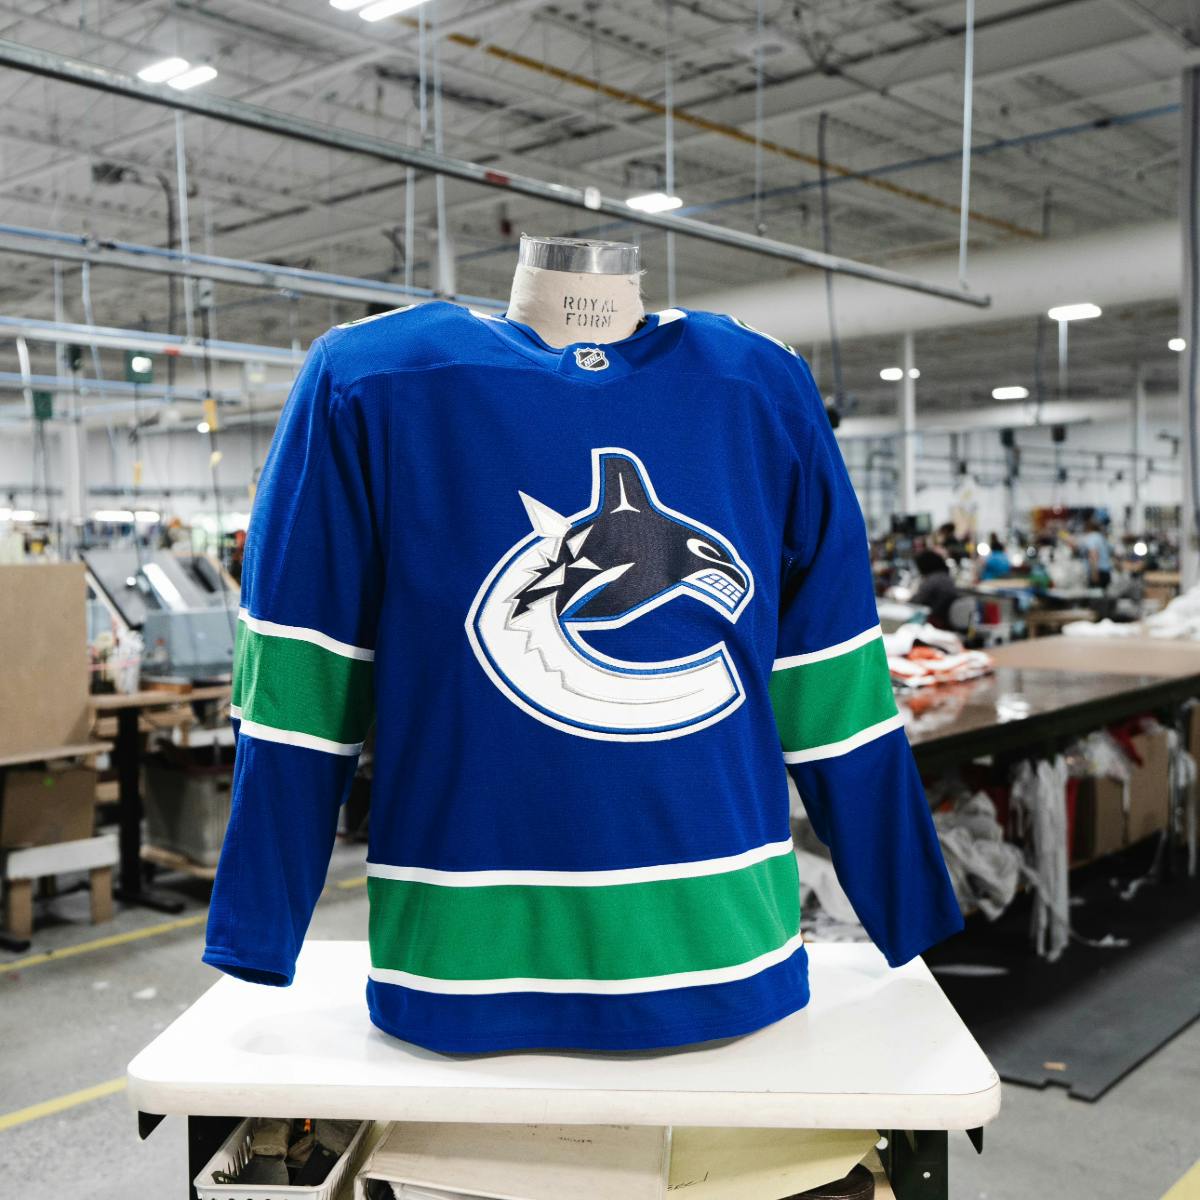 New Vancouver Canucks jersey from Fanatics